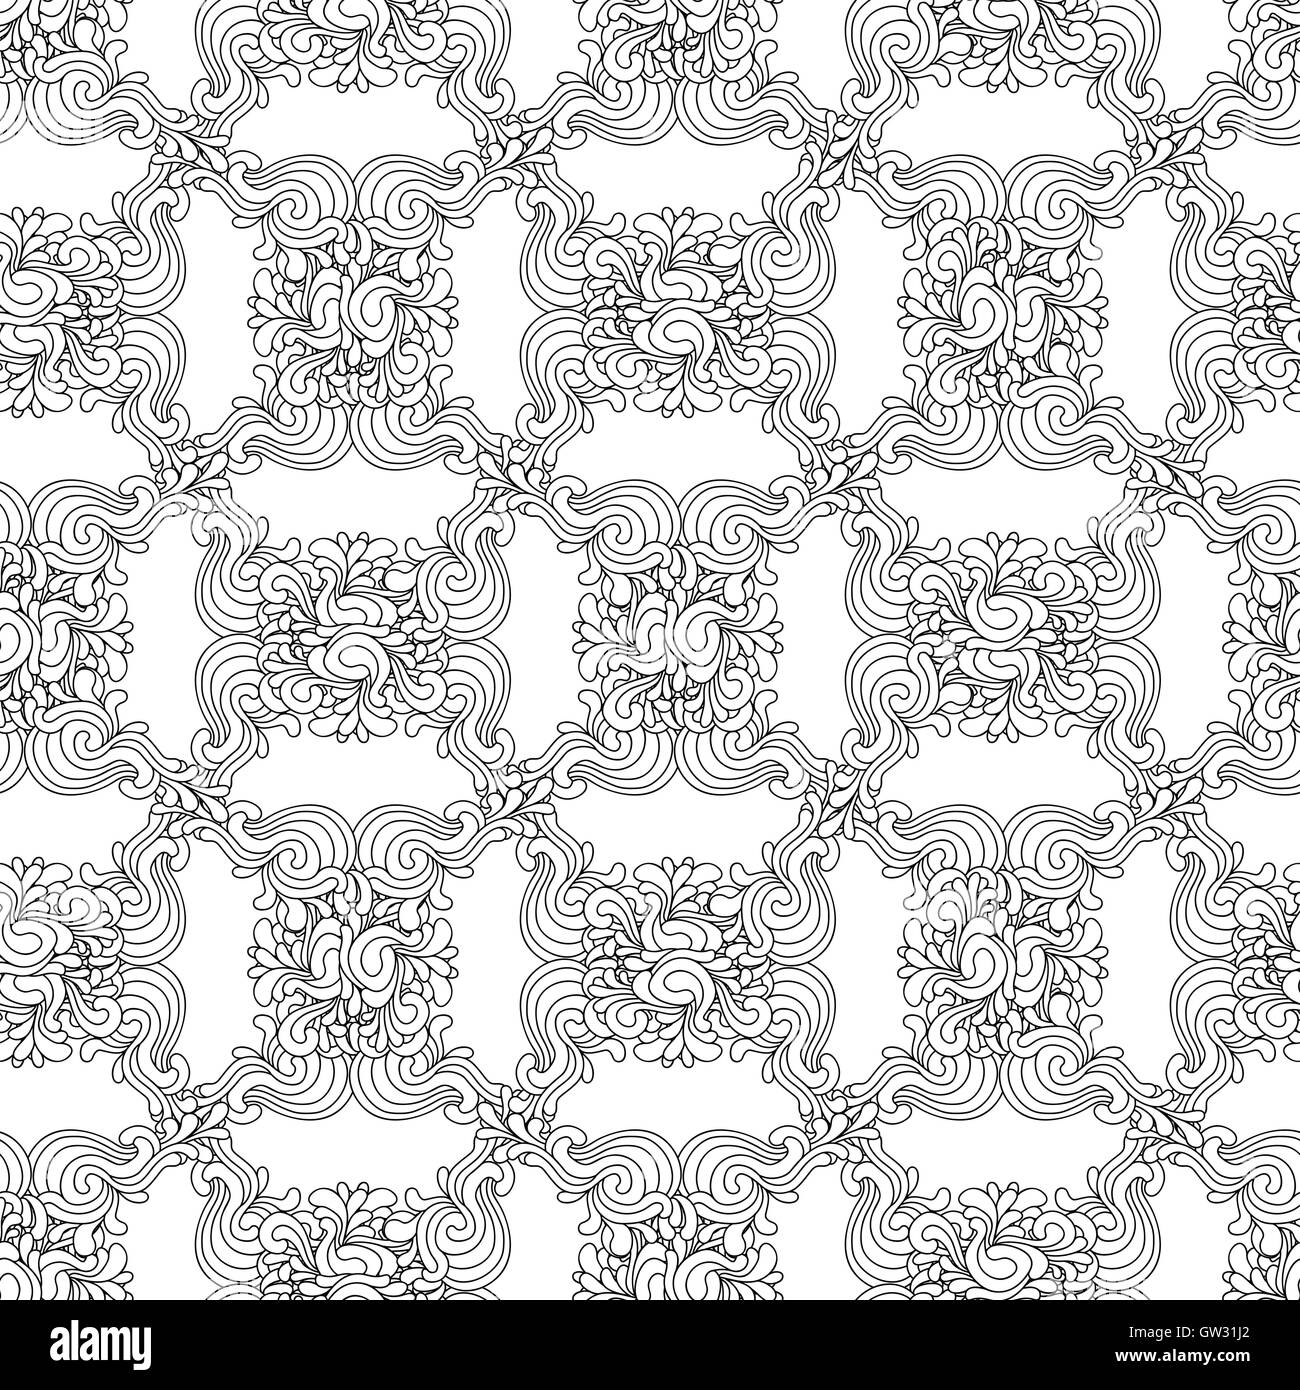 Seamless decorative zentangle graphic pattern on white background Stock Vector